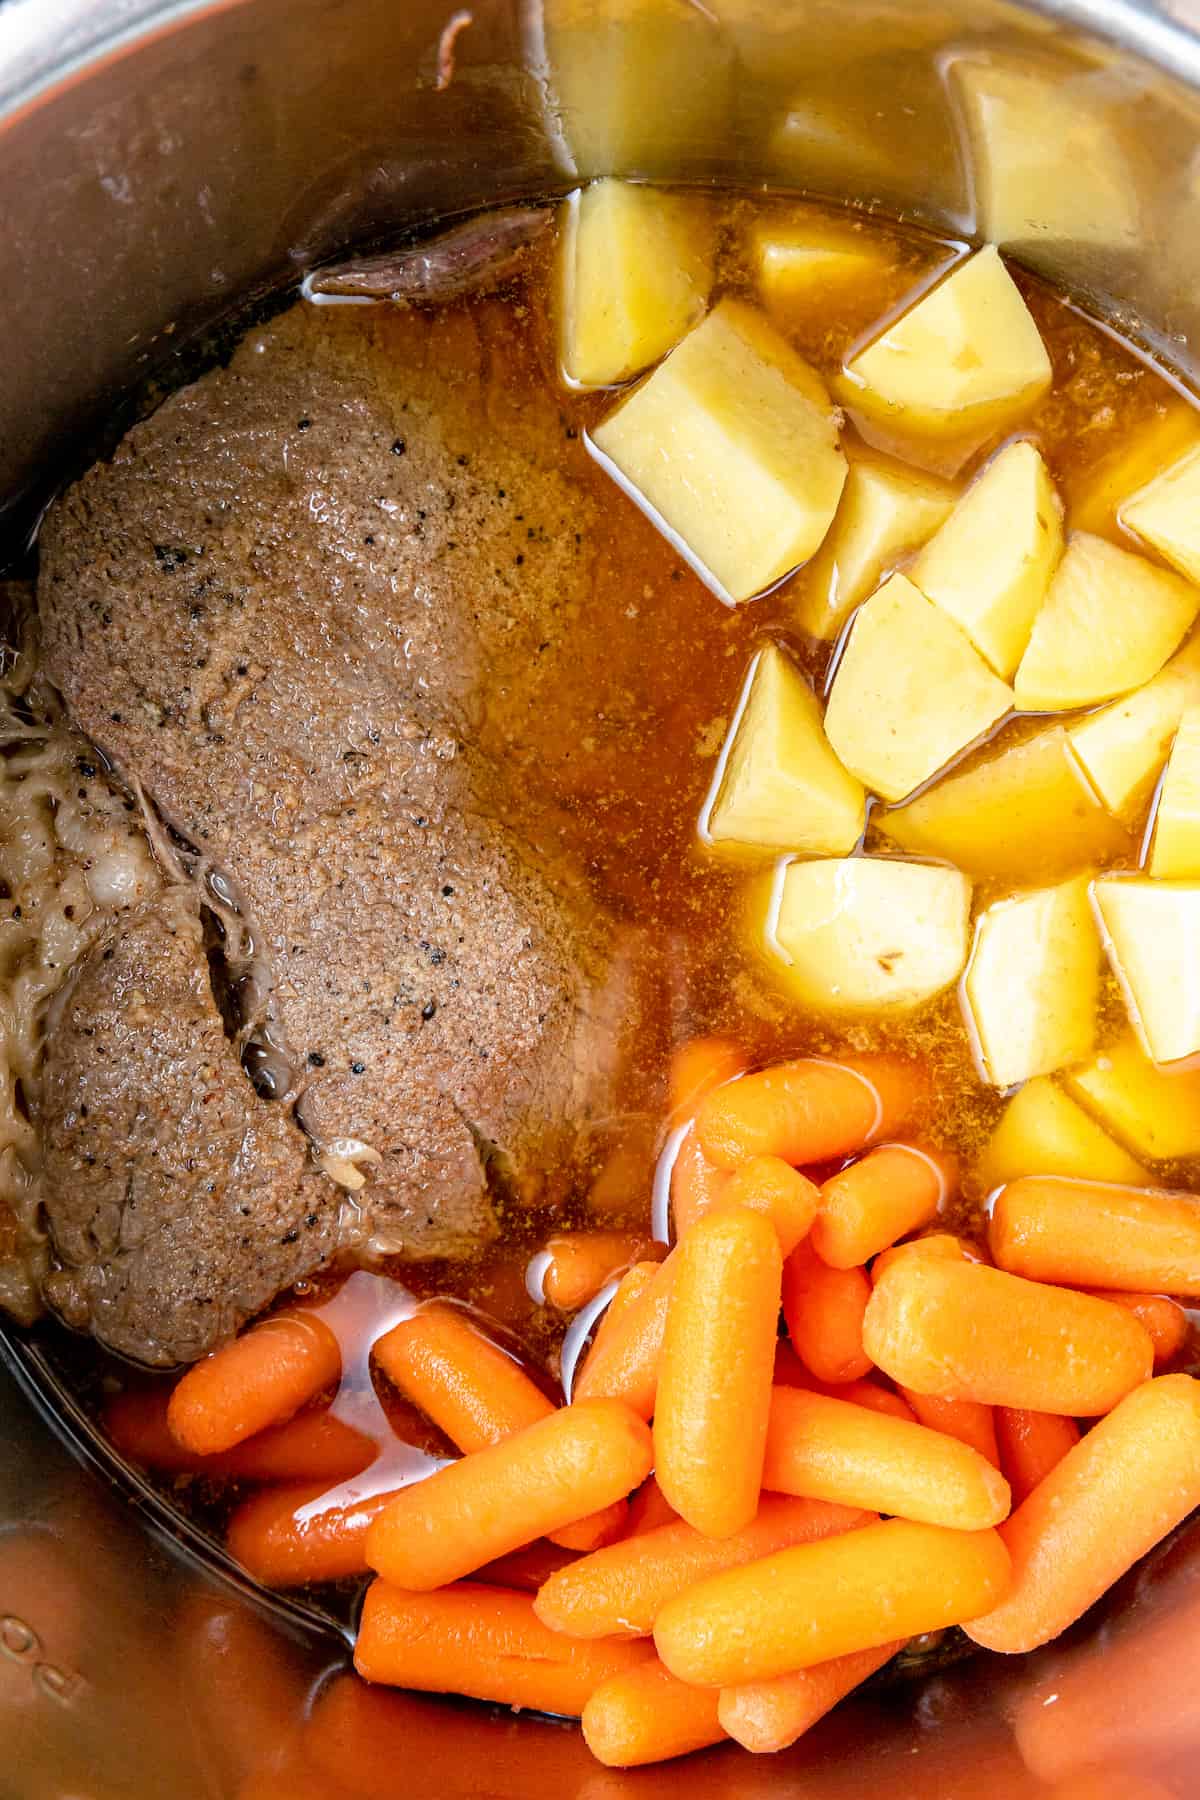 Steak, carrots and potatoes in broth